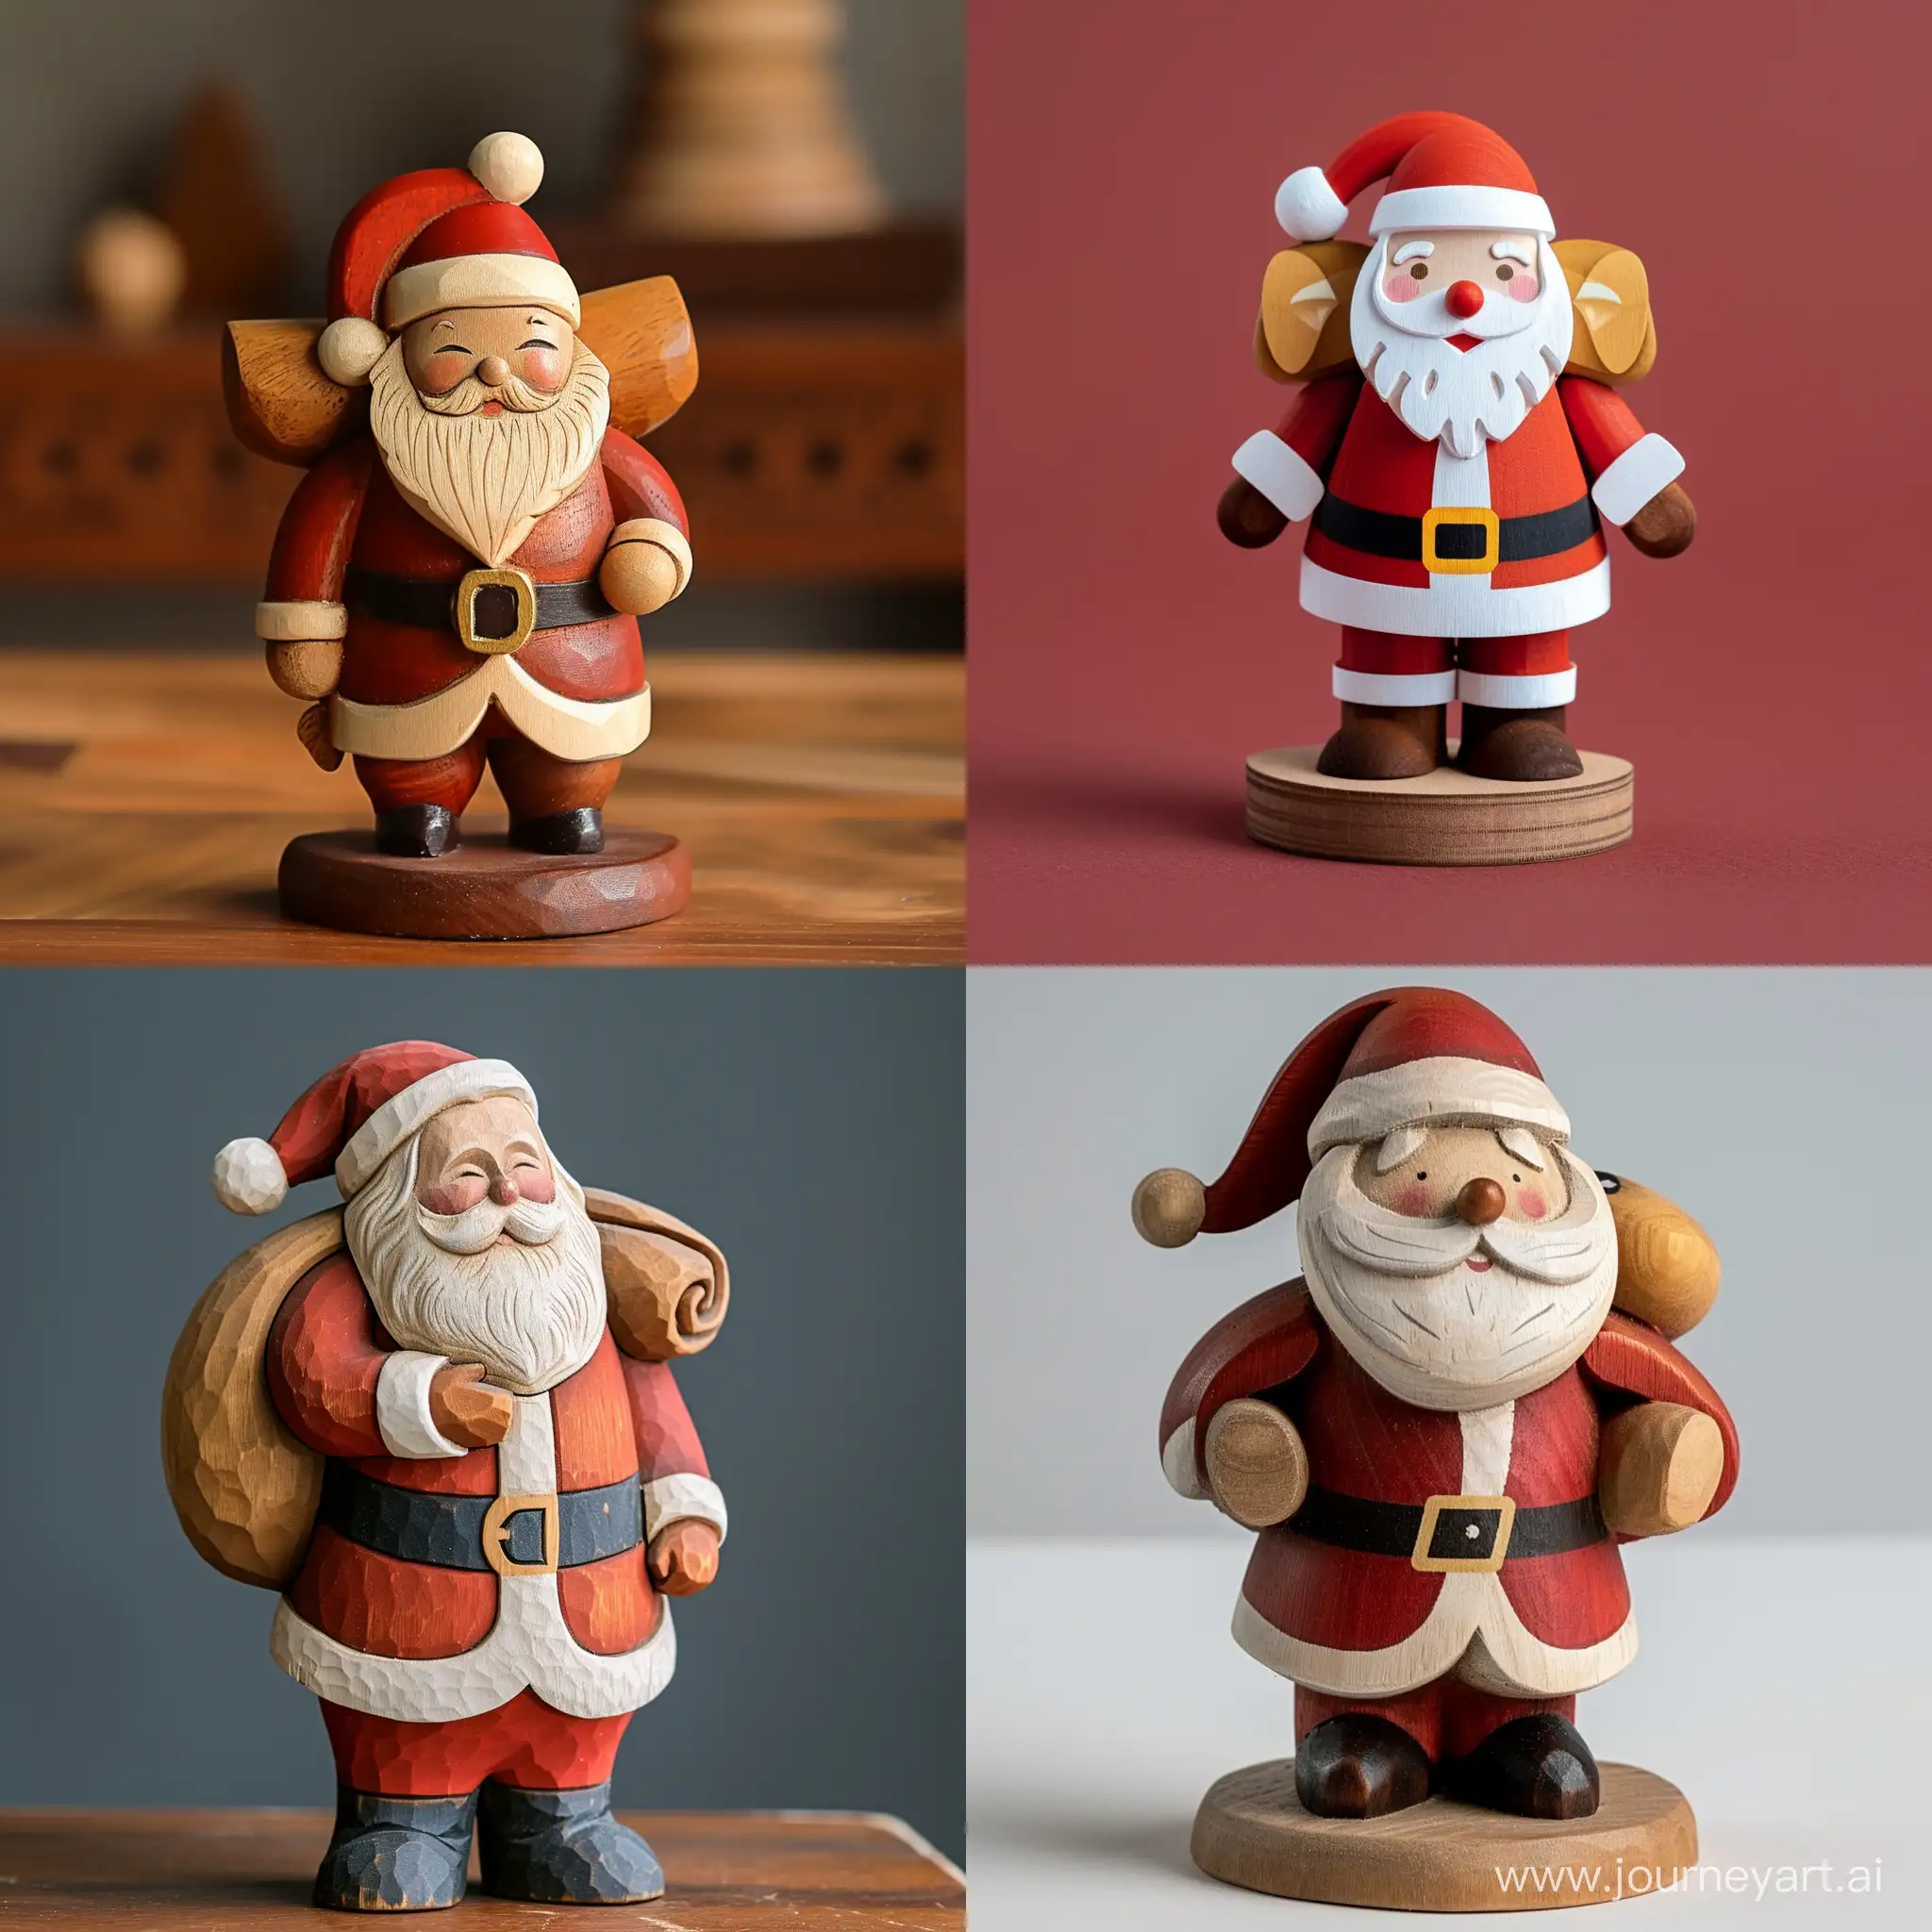 wooden figurine of Santa Claus with a bag on his shoulders, in flat style